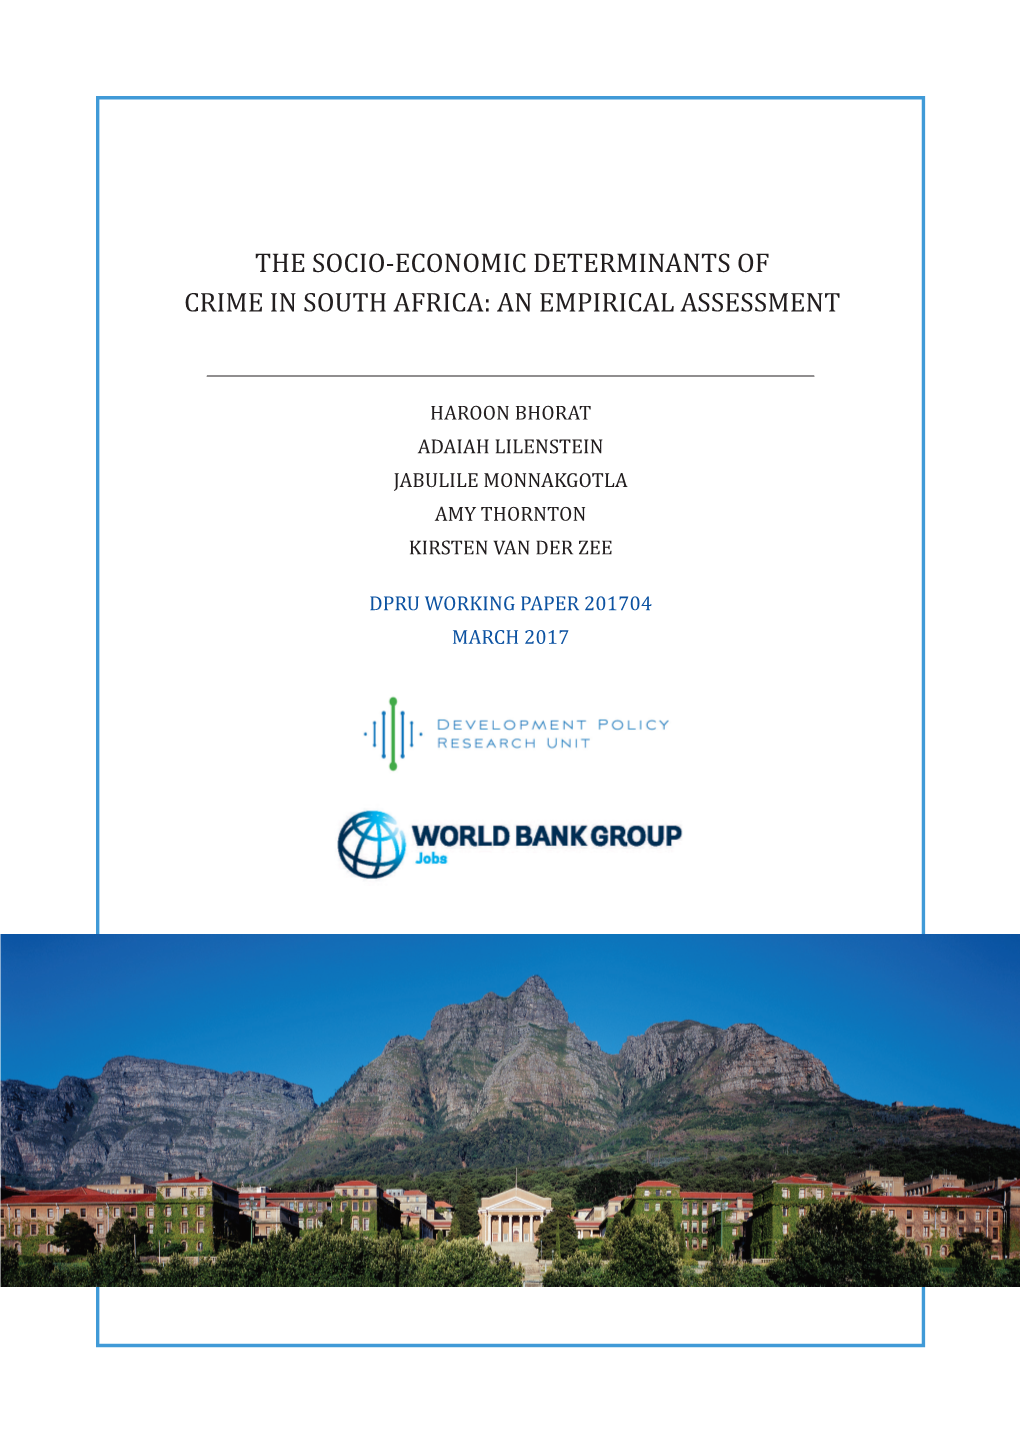 Socio-Economic Determinants of Crime in South Africa: an Empirical Assessment